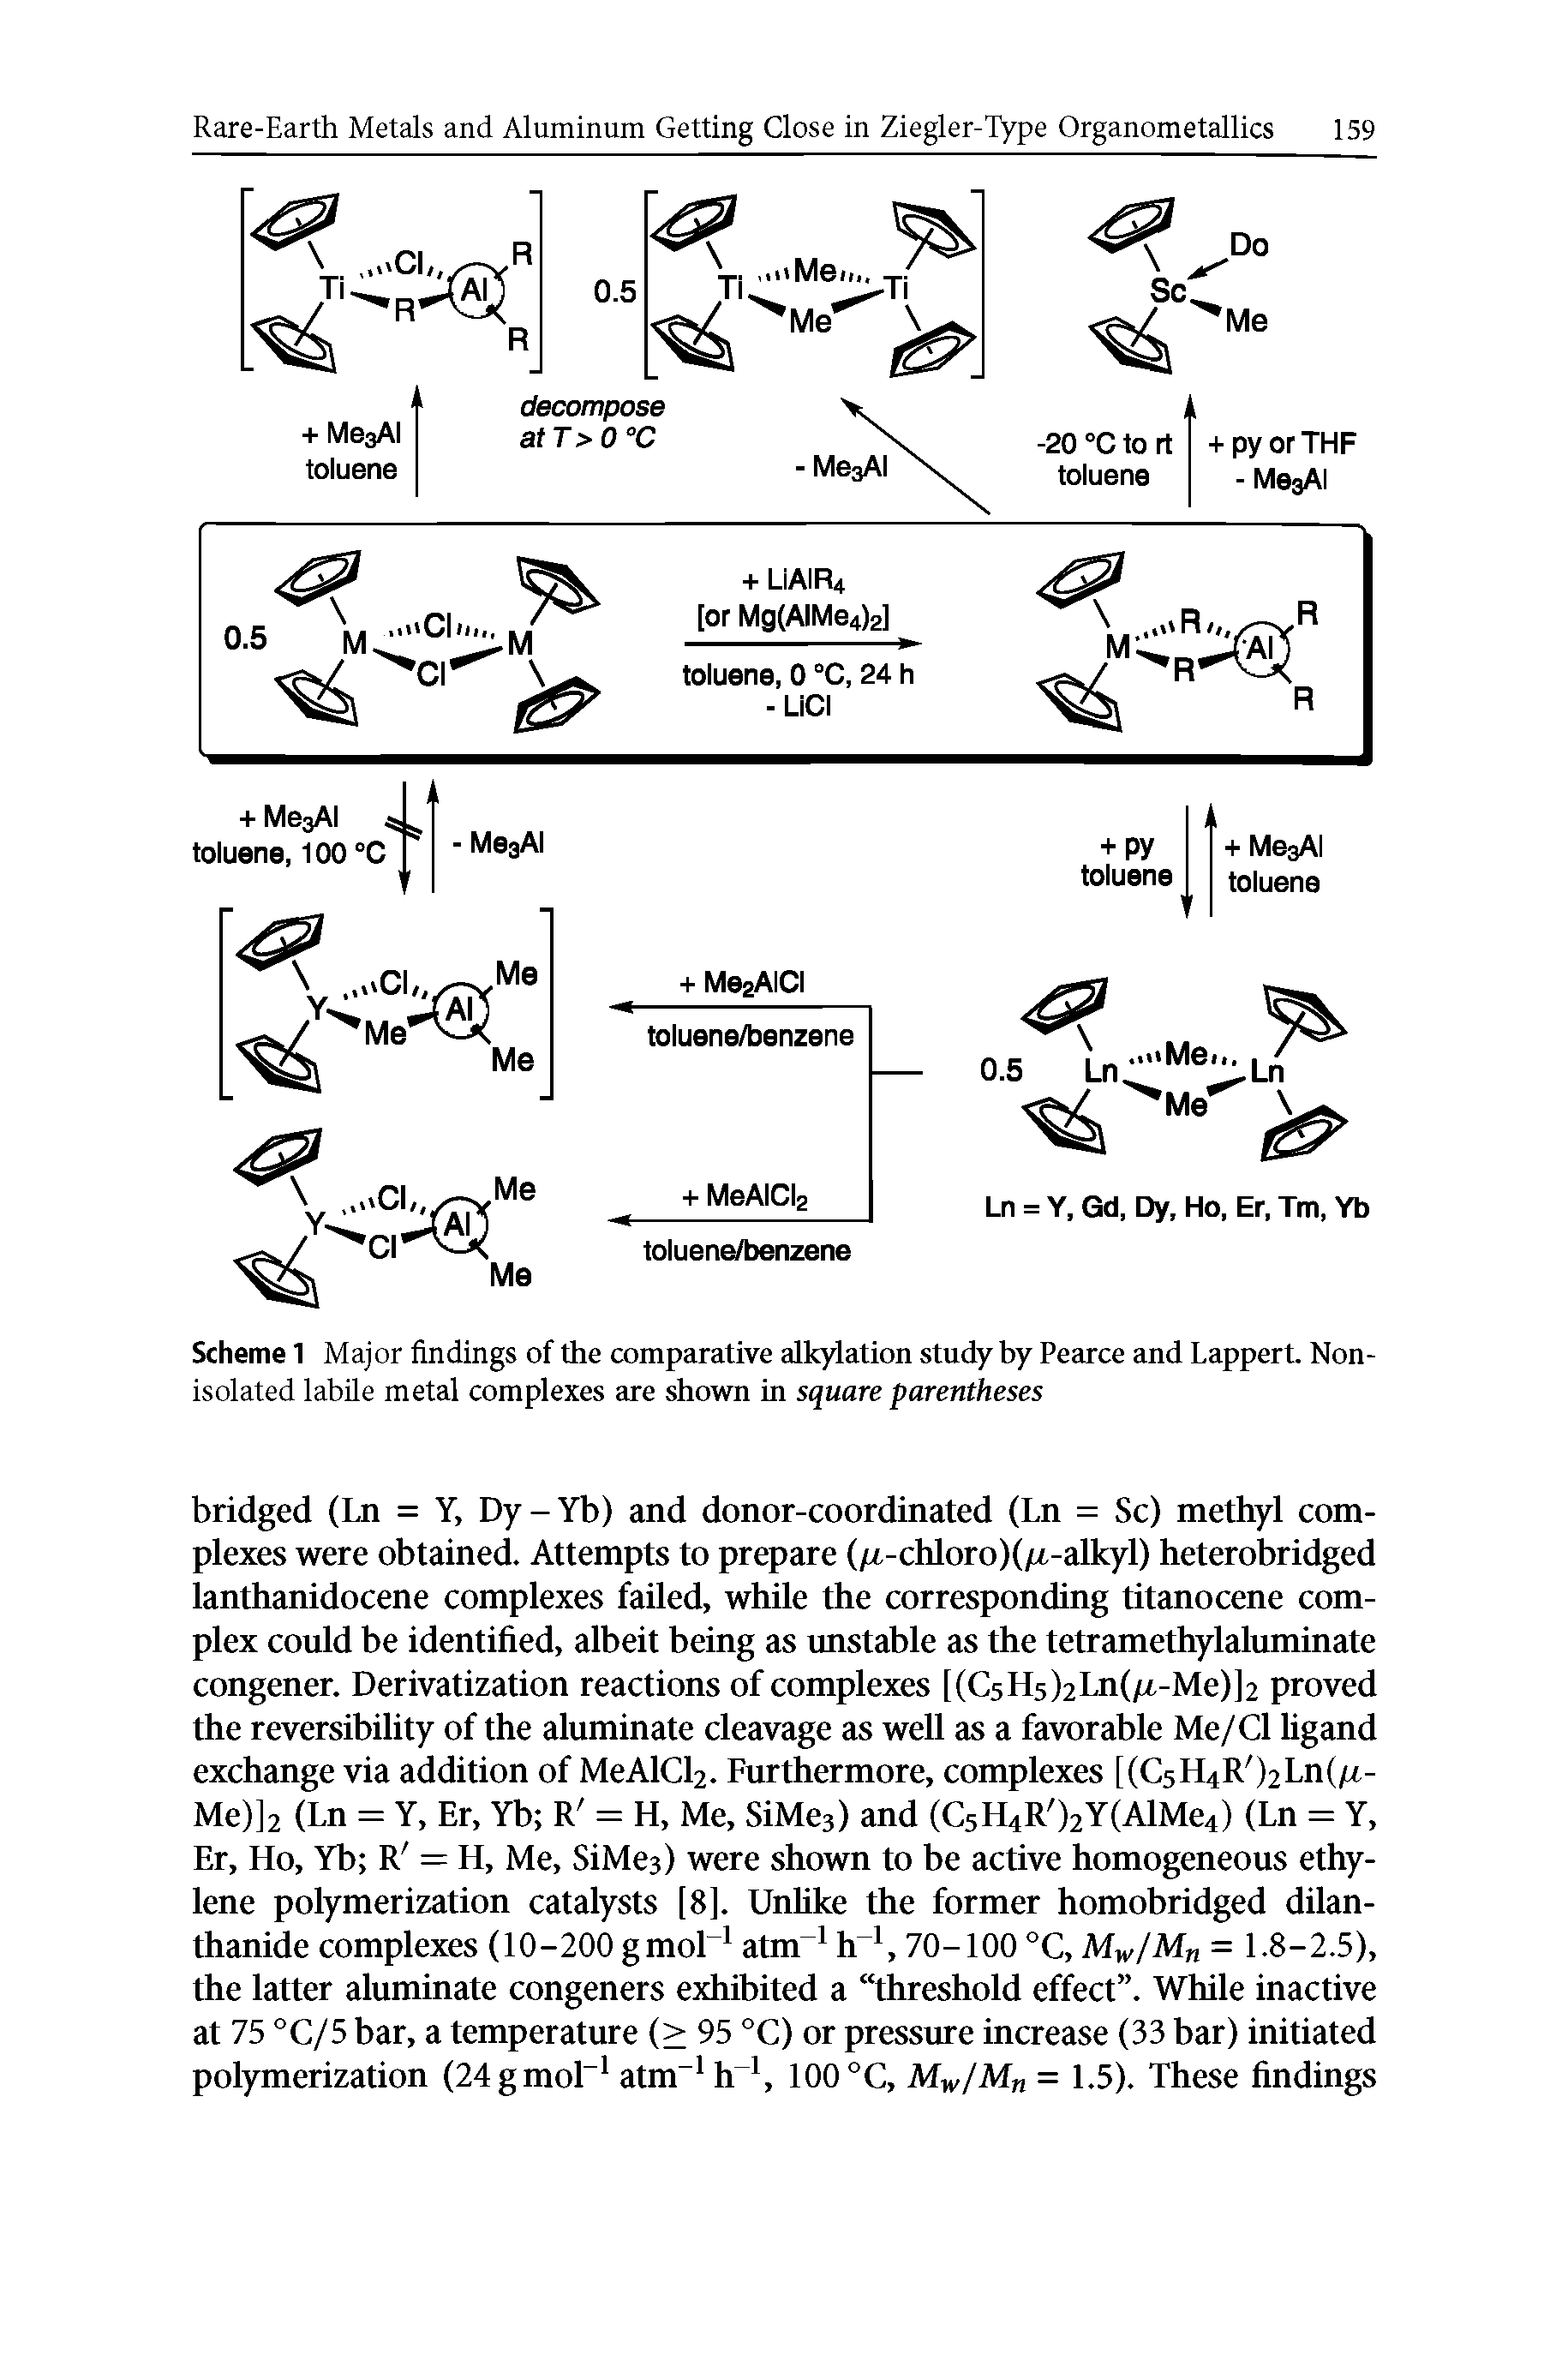 Scheme 1 Major findings of the comparative alkylation study by Pearce and Lappert. Nonisolated labile metal complexes are shown in square parentheses...